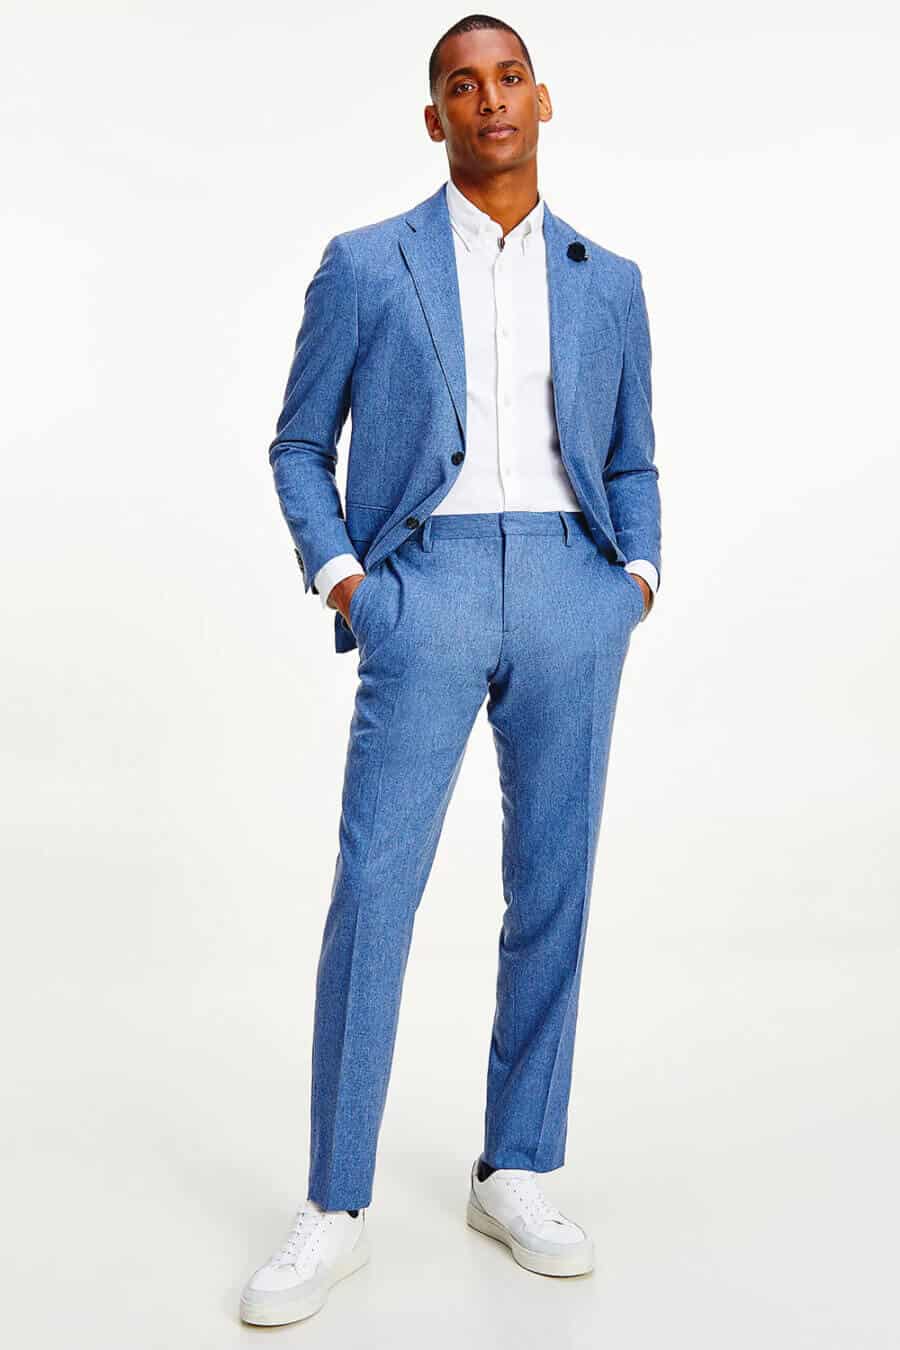 Men's bright blue suit with white shirt and white sneakers outfit